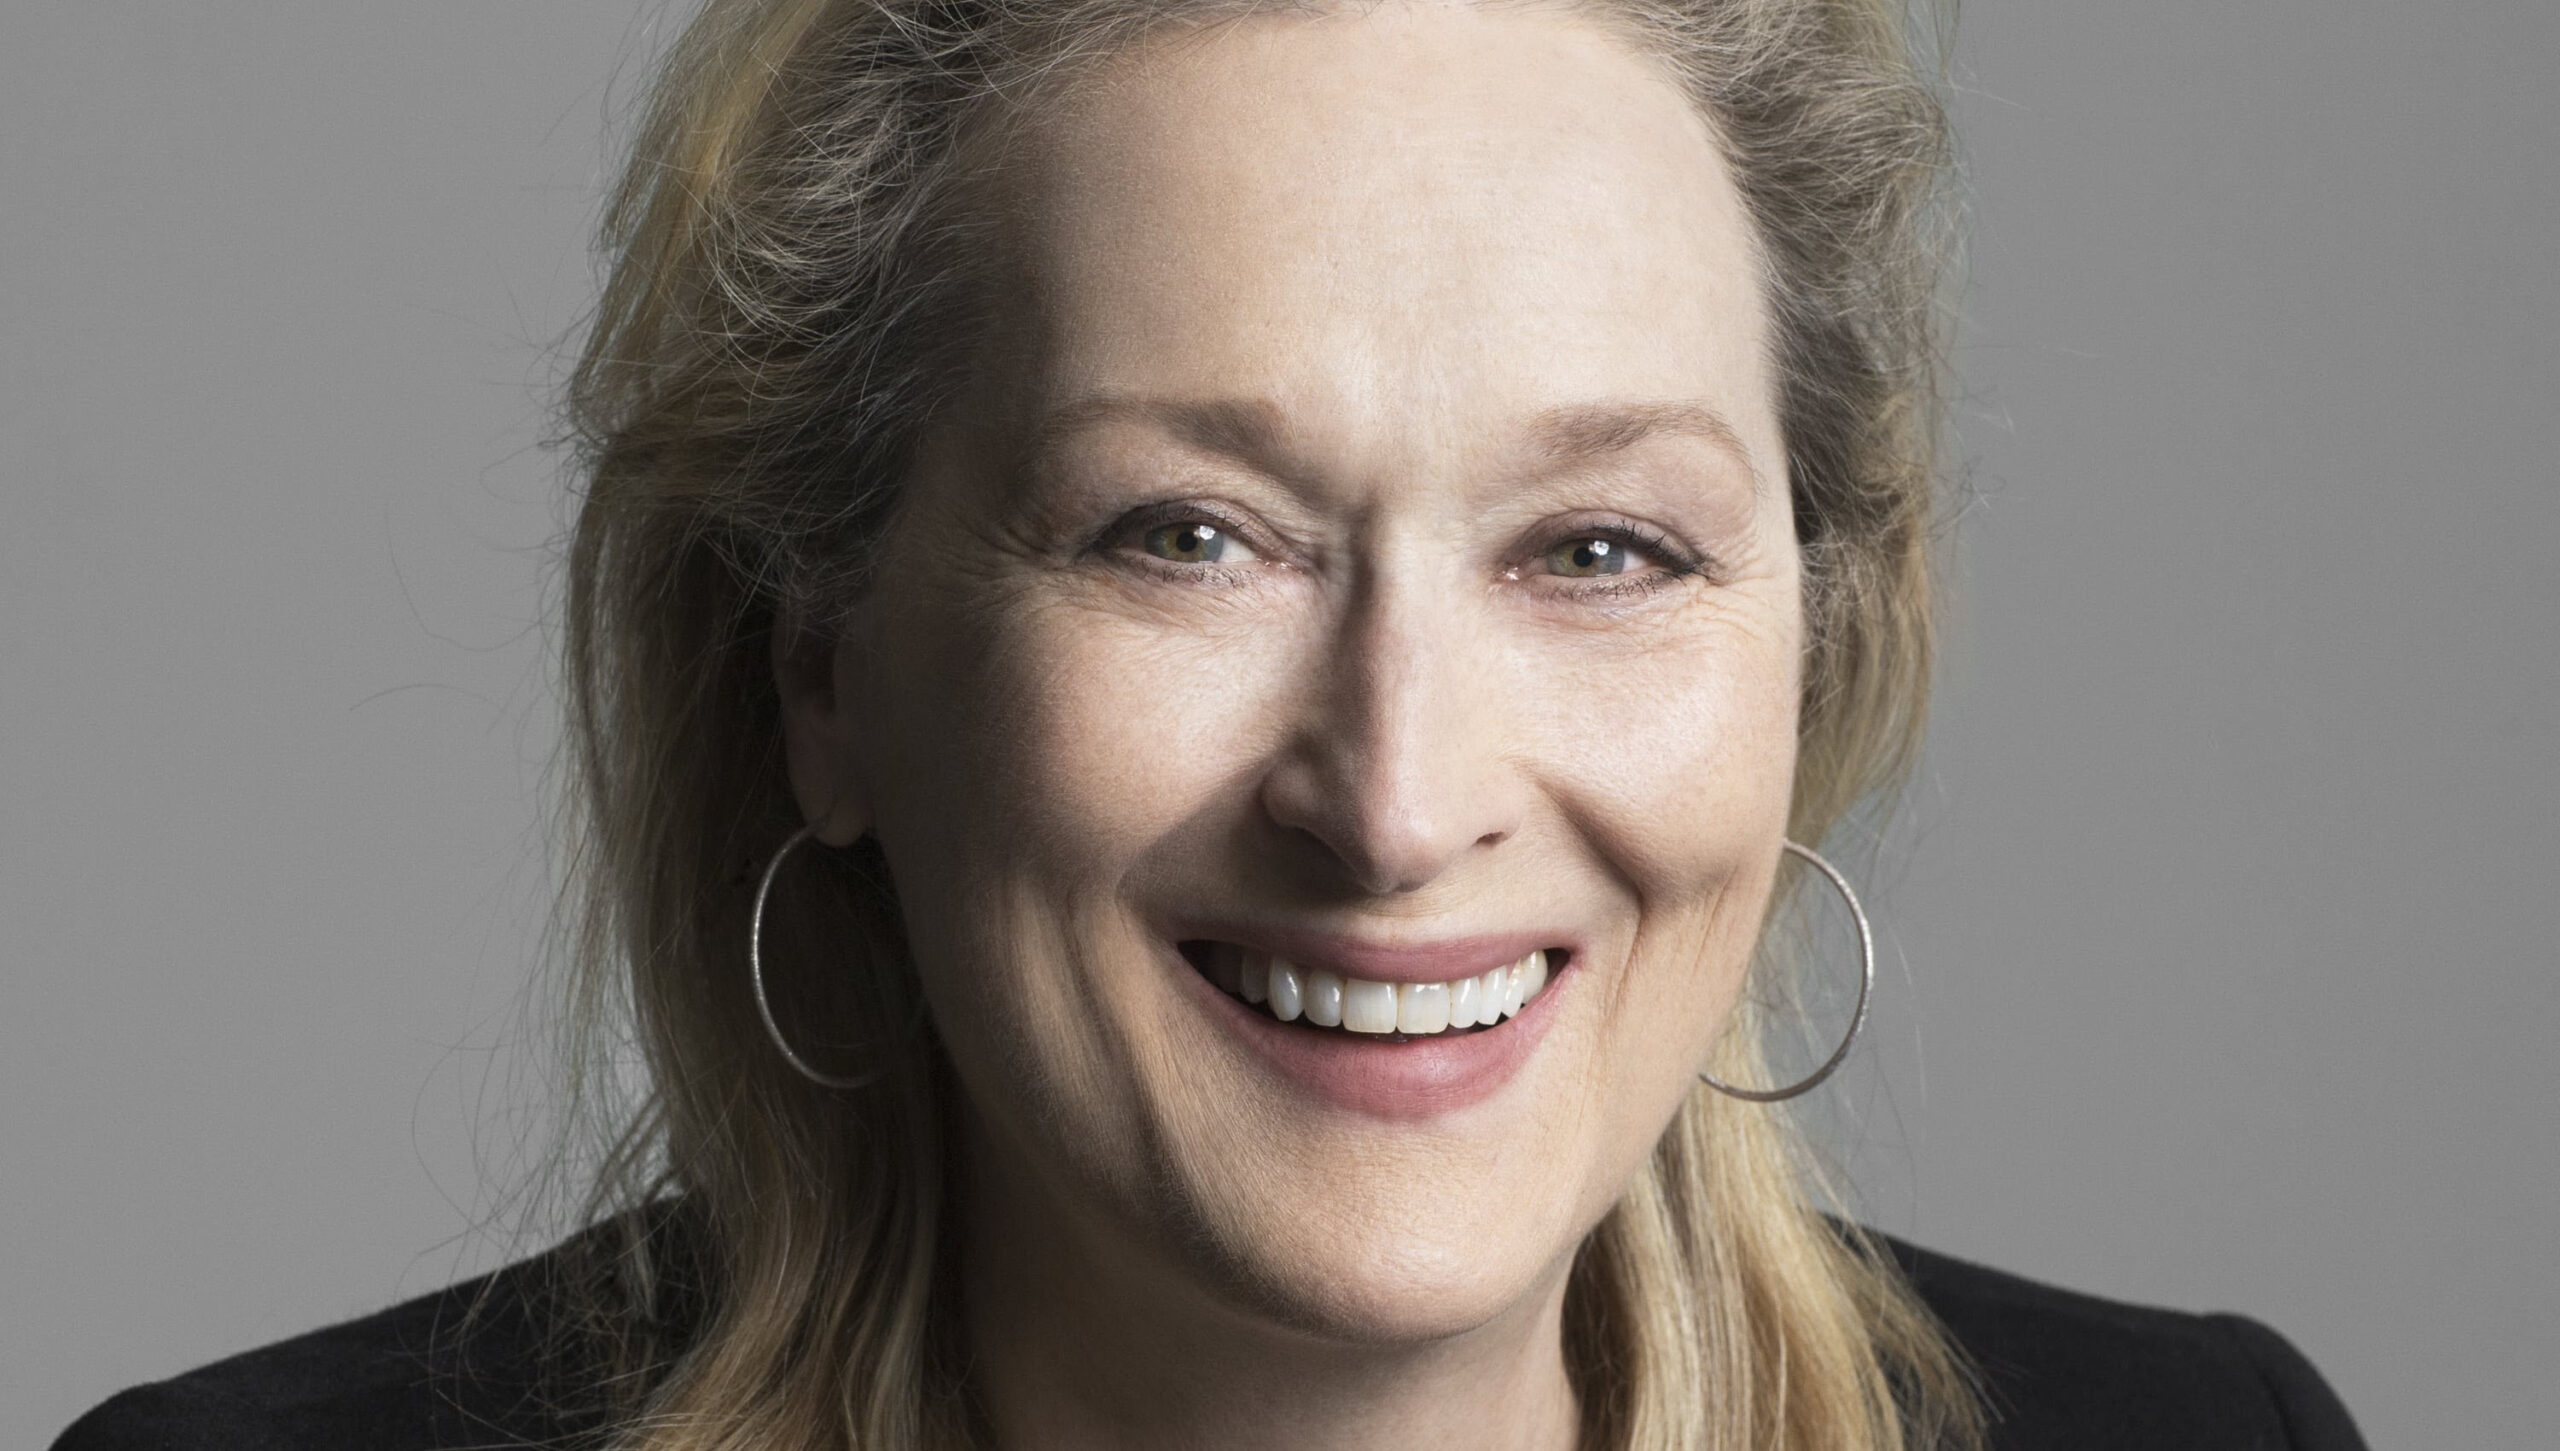 Meryl Streep Guest of honour at the opening ceremony of the 77th Festival de Cannes on the stage of the Grand Théâtre Lumière - Photo © Brigitte Lacombe